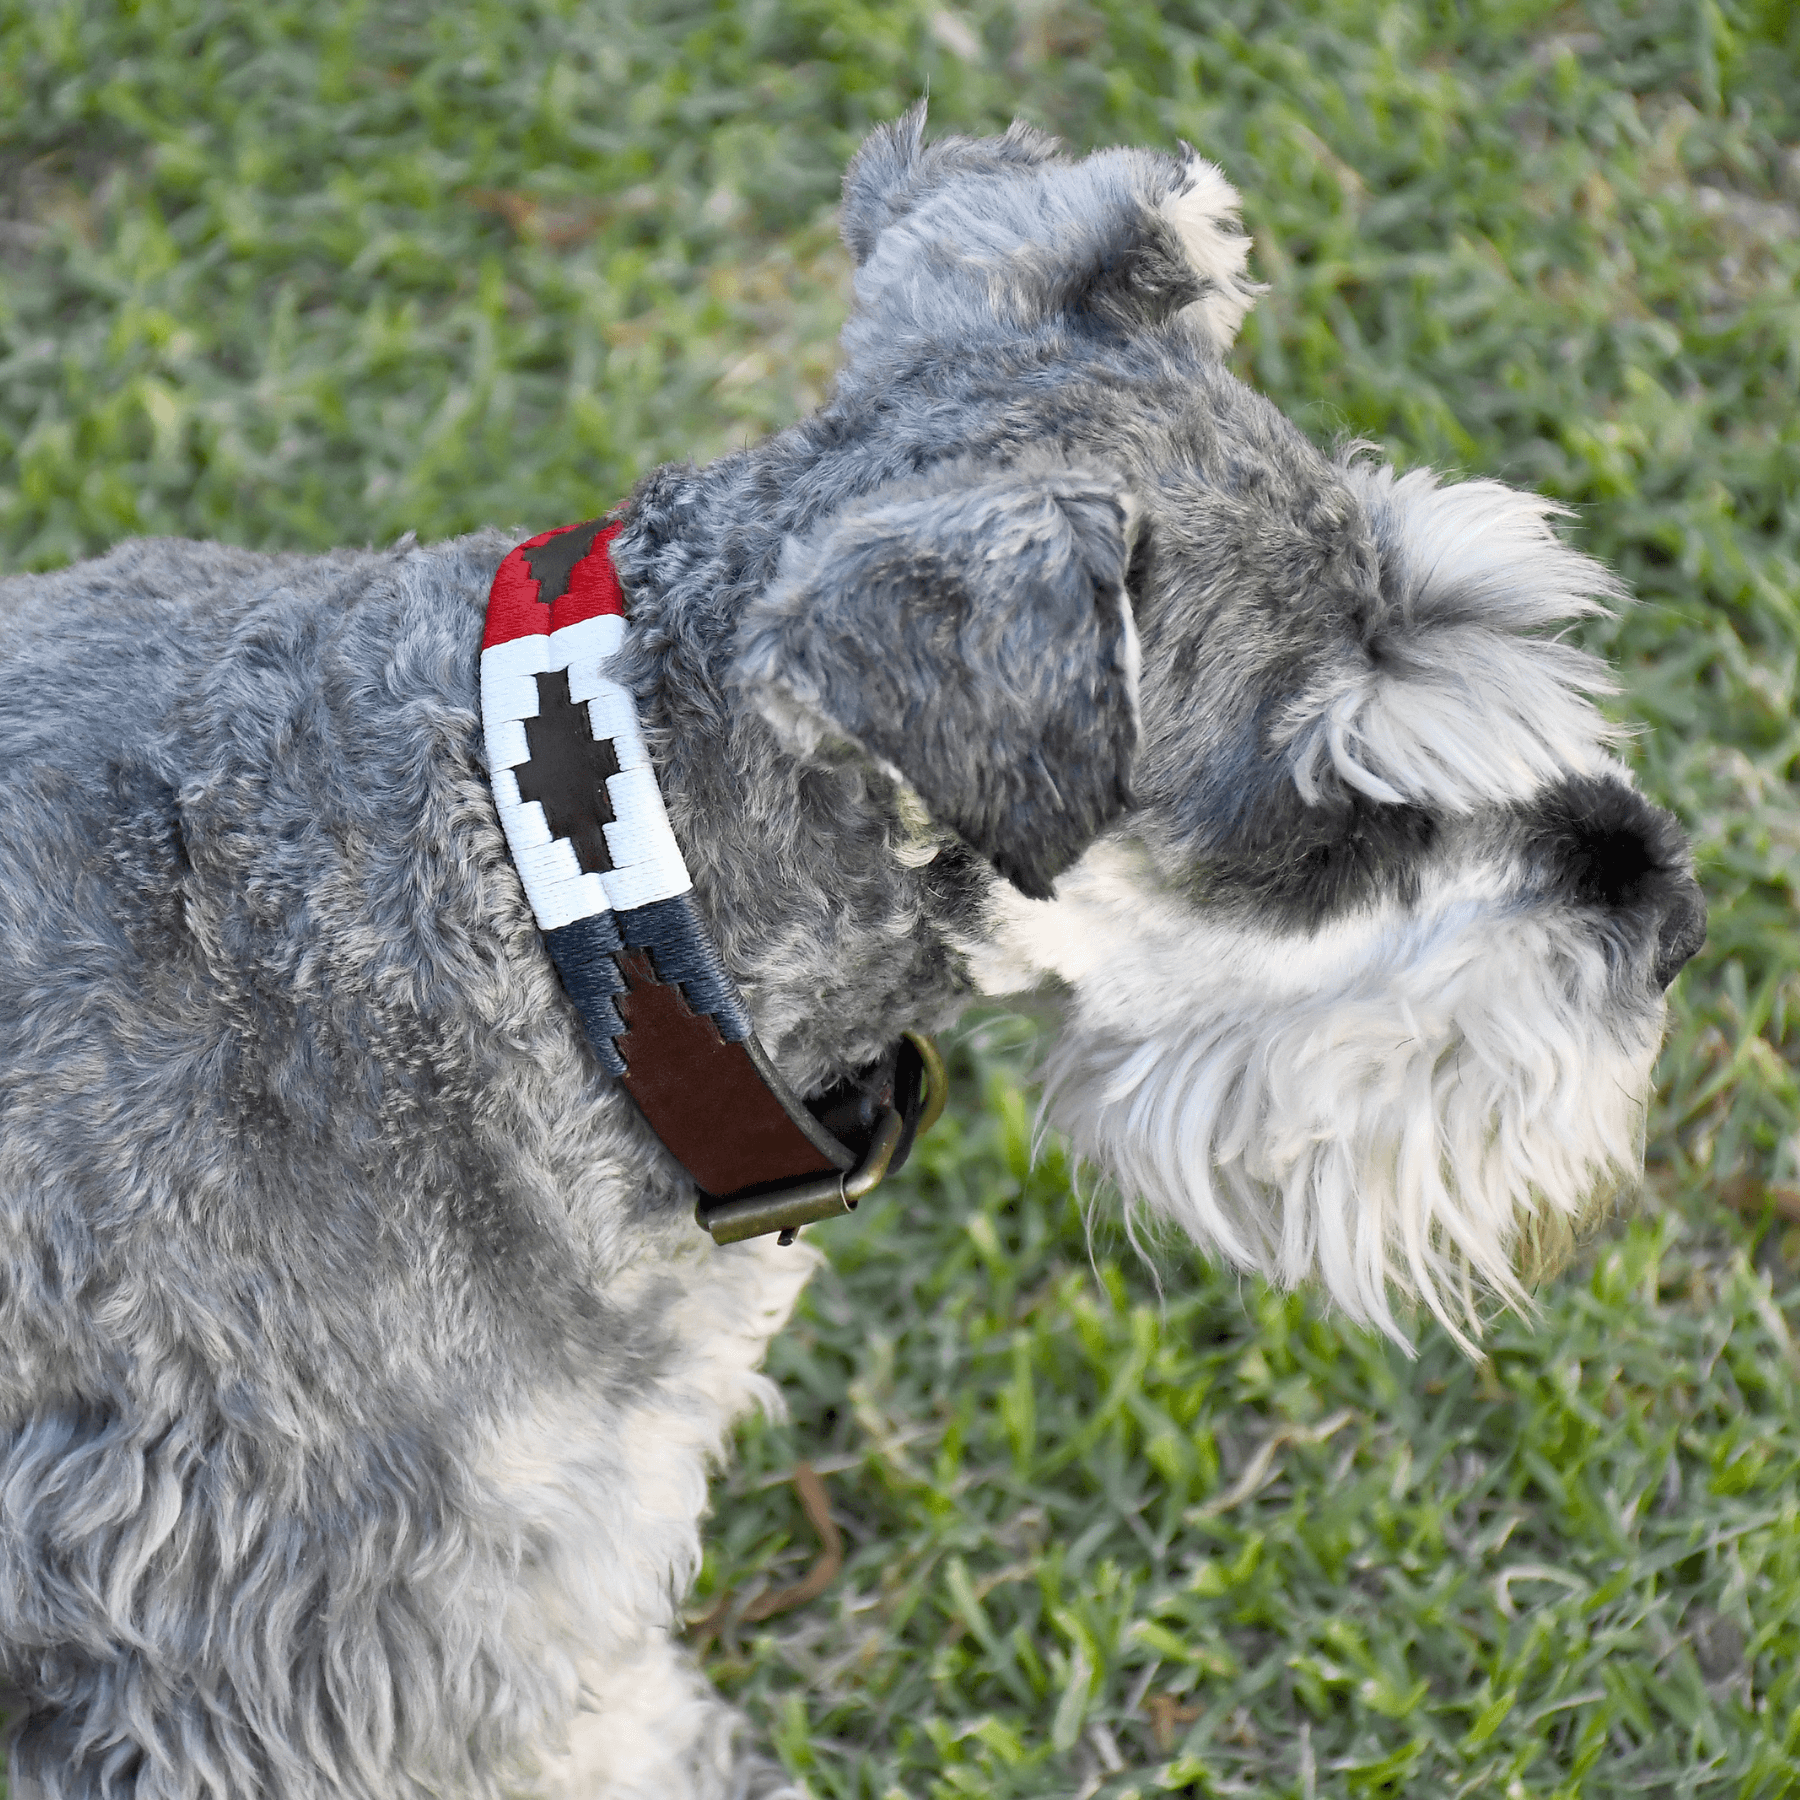 Gaucholife Dogs Embroidered Leather Dog Collar (Ceibo)